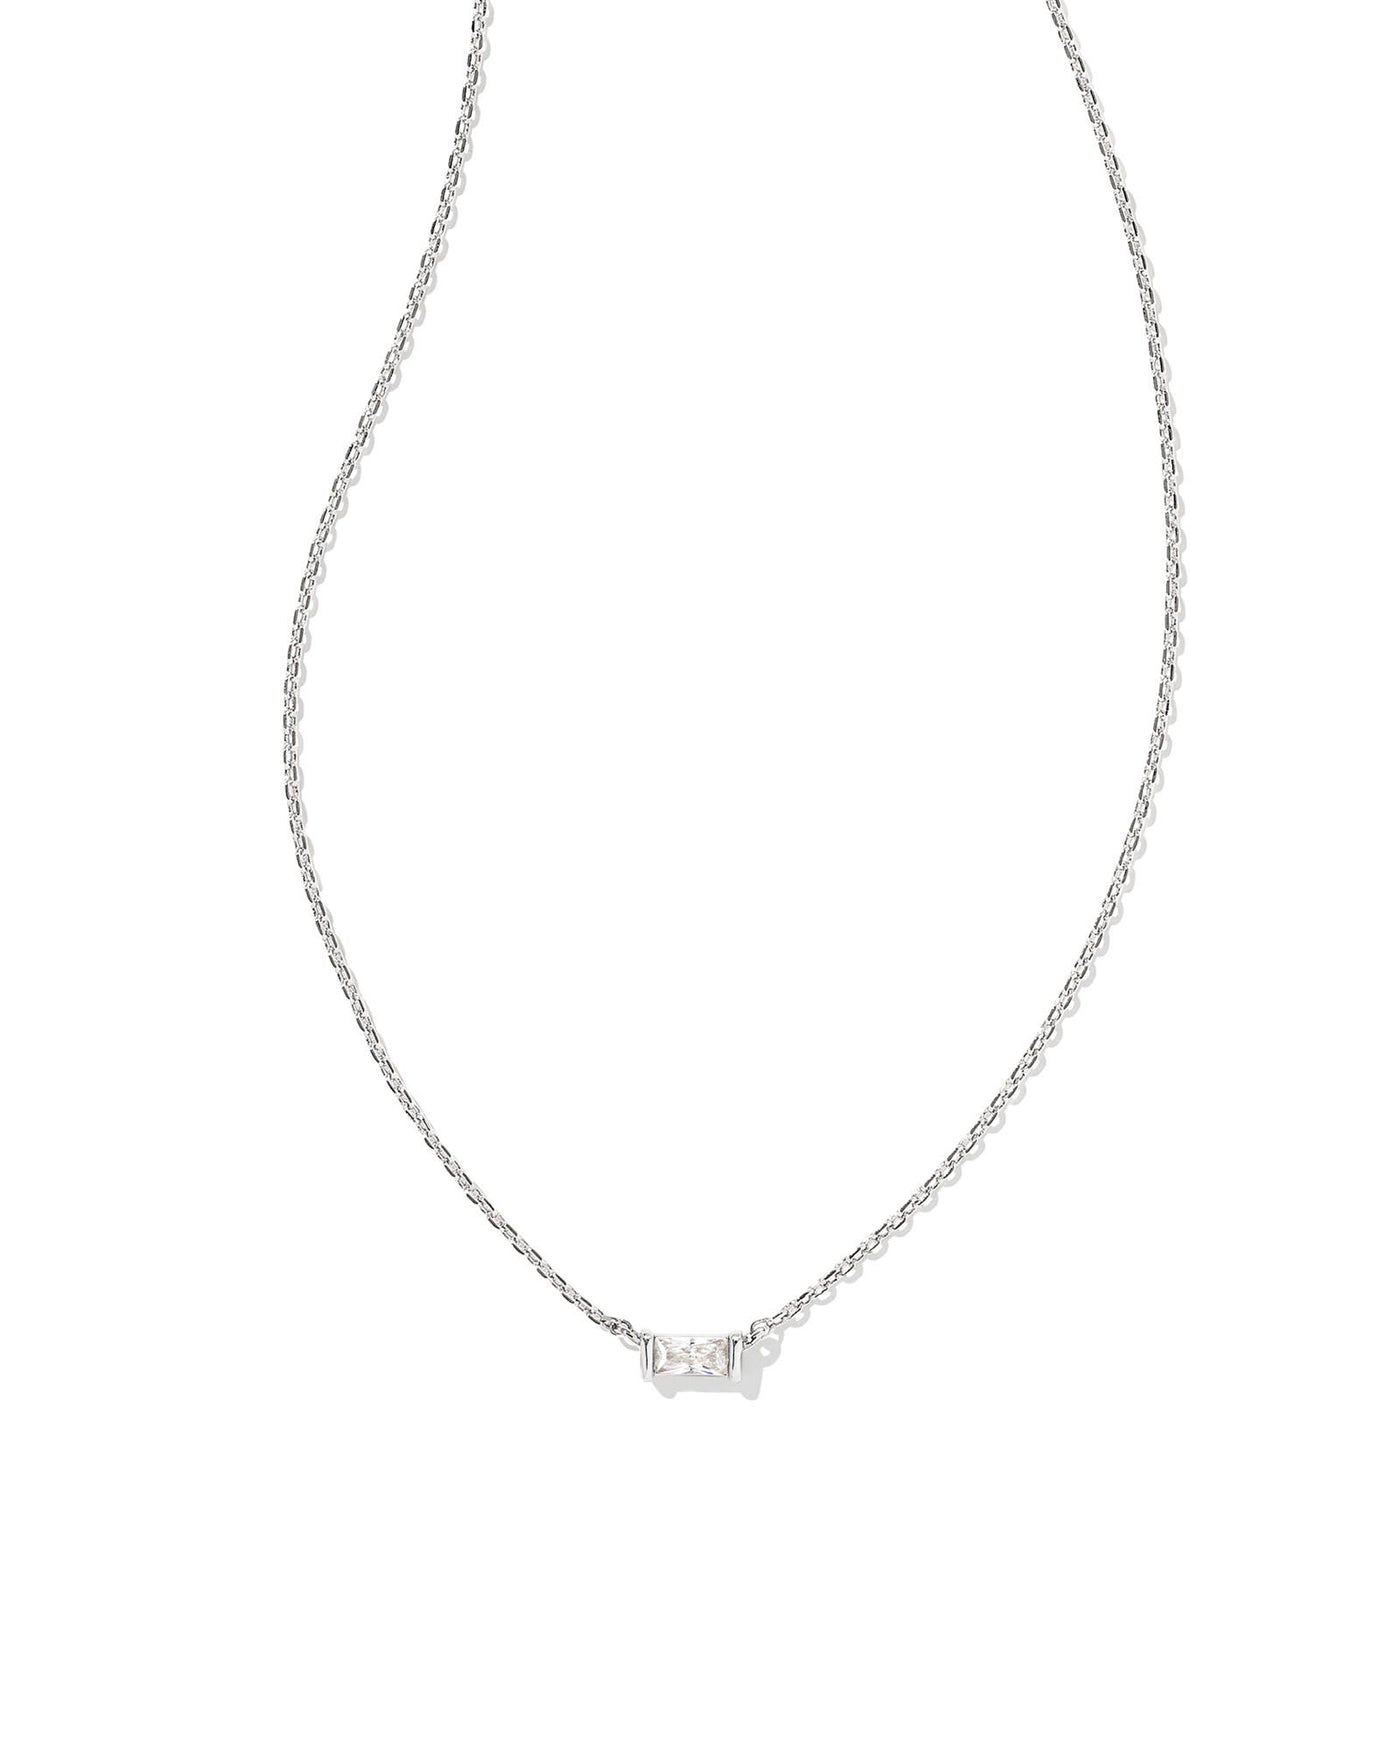 Kendra Scott Juliette Silver Pendant Necklace in White Crystal-Necklaces-Kendra Scott-Market Street Nest, Fashionable Clothing, Shoes and Home Décor Located in Mabank, TX